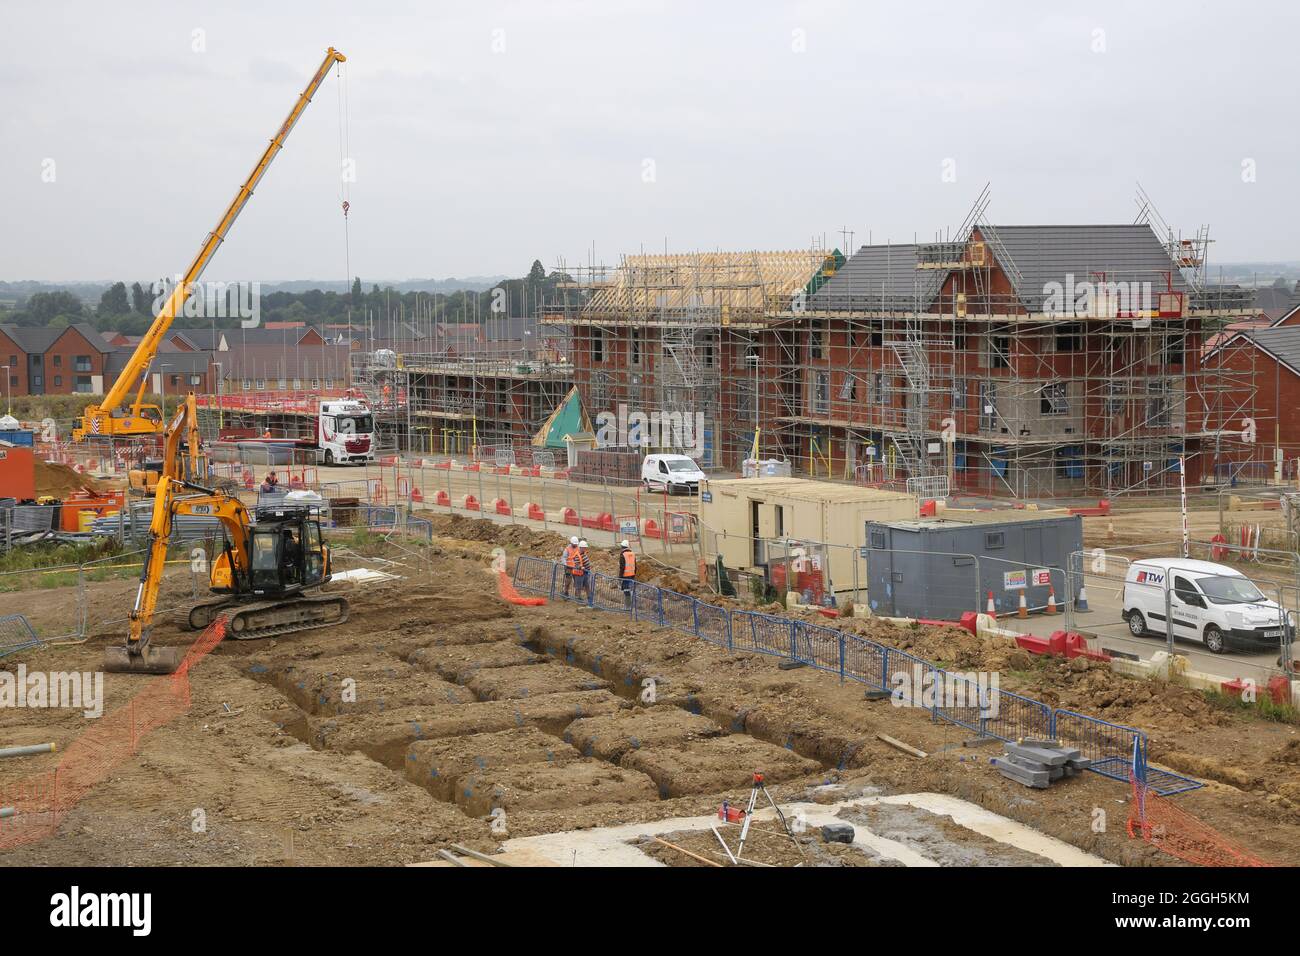 Construction of a large housing development in Milton Keynes. Traditional brick construction. Stock Photo